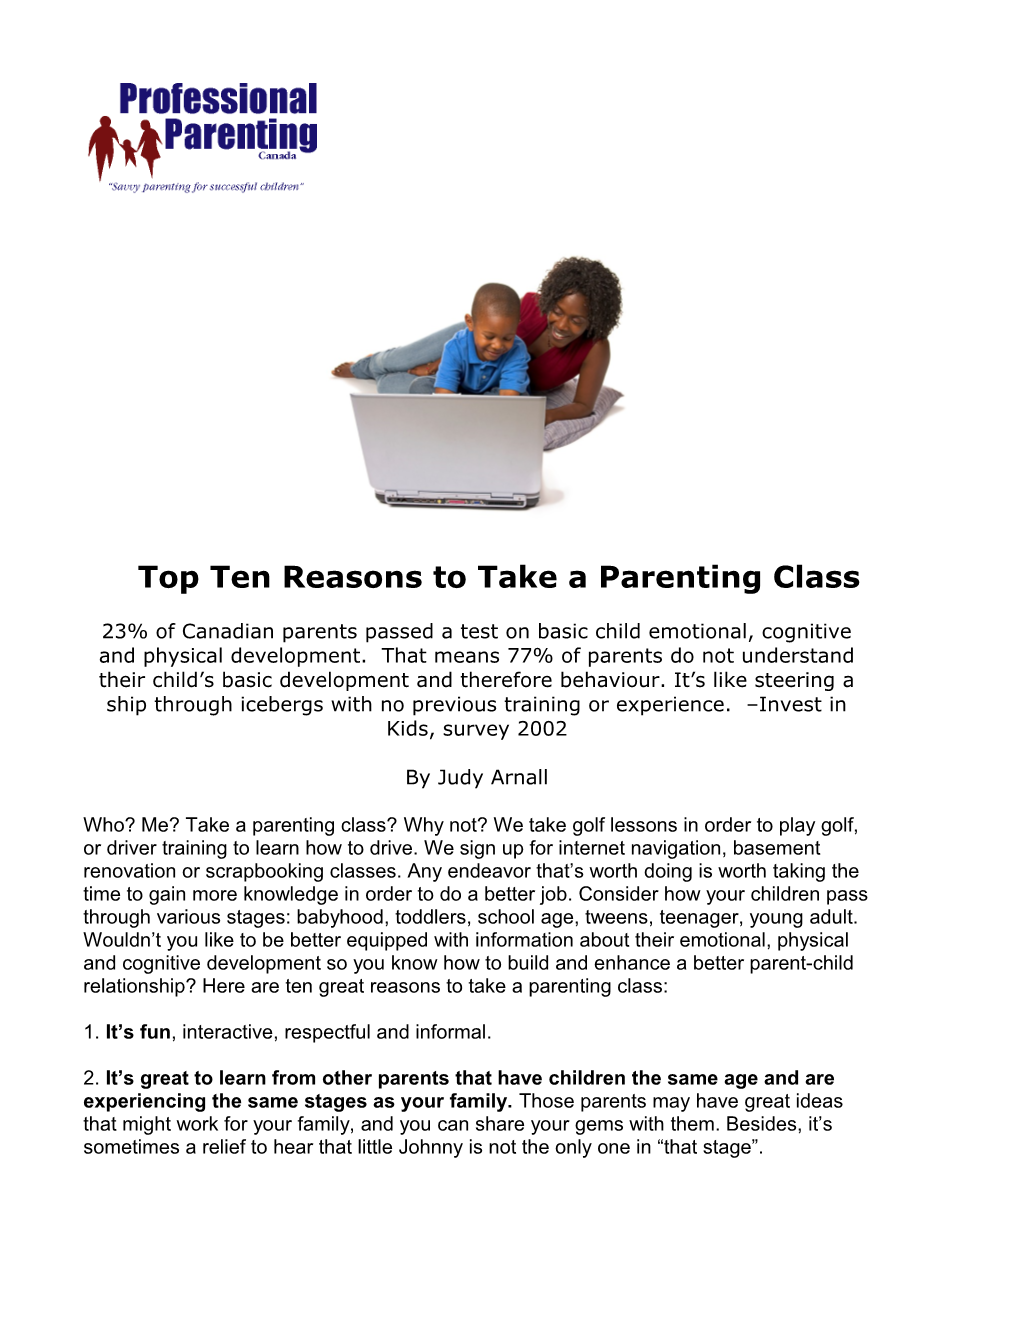 Top Ten Reasons to Take a Parenting Class